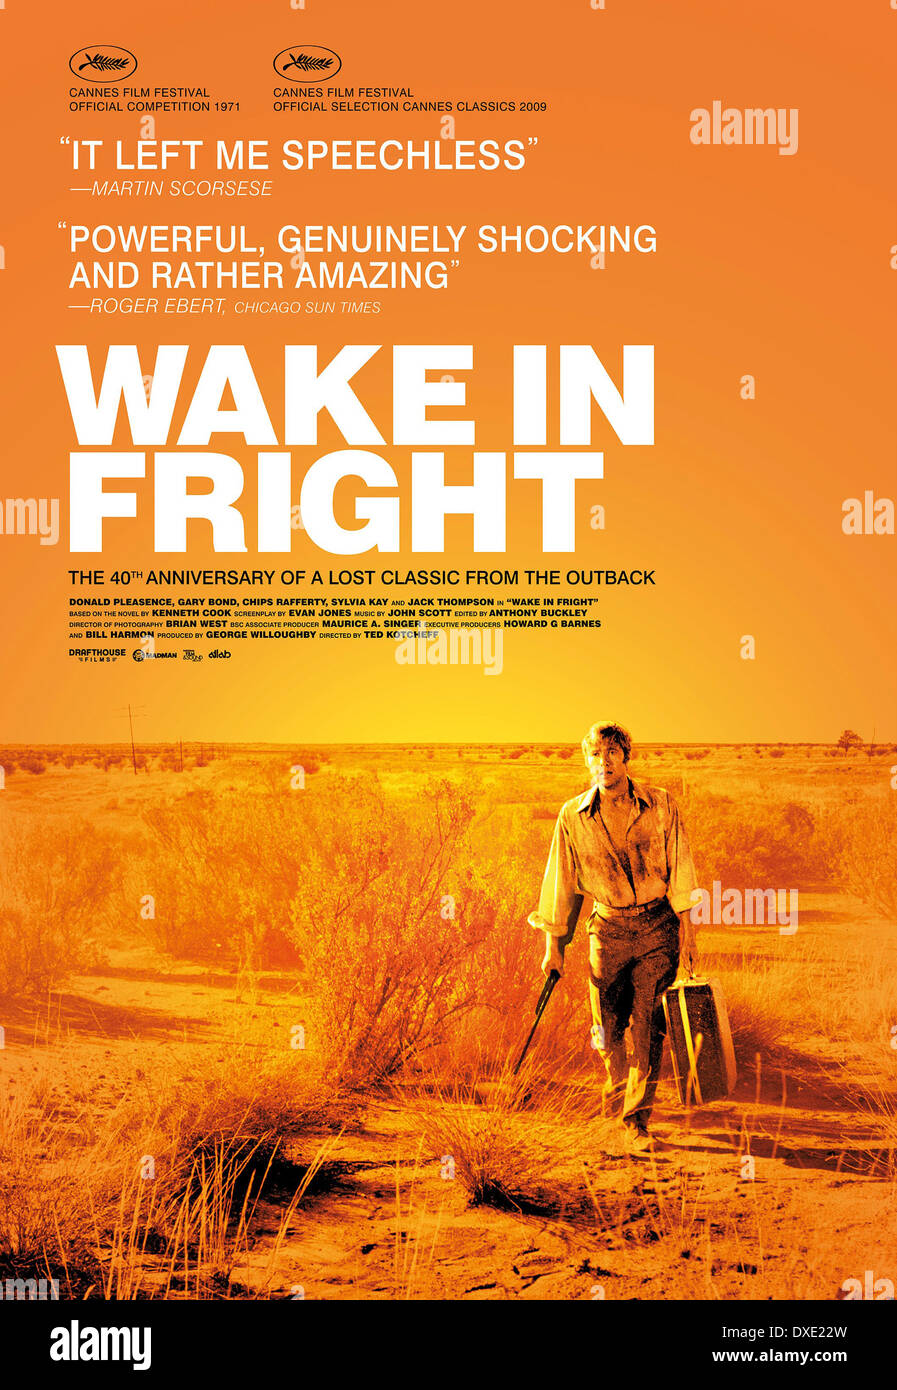 WAKE IN FRIGHT DONALD PLEASENCE GARY BOND JACK THOMPSON HUNTING IN CAR POSTER 